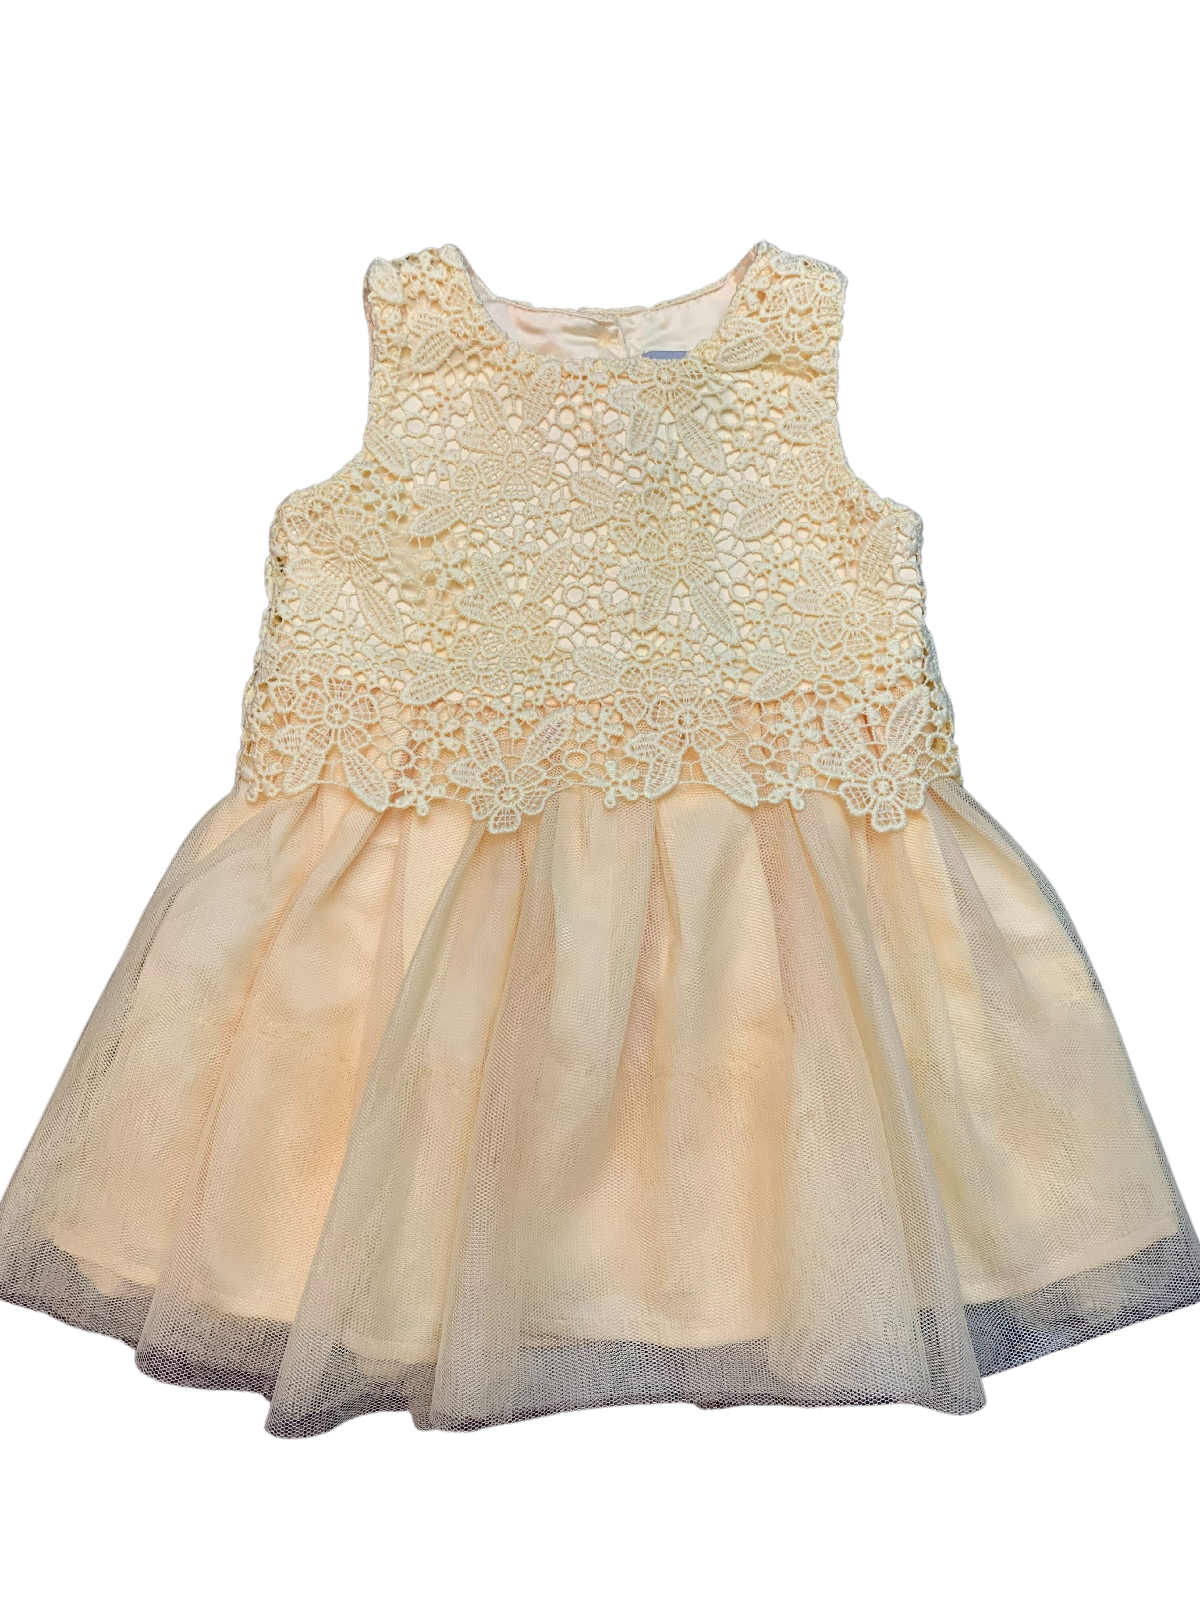 Primark Lace and Tutu Occasion Dress Baby Girl 3-6 Months